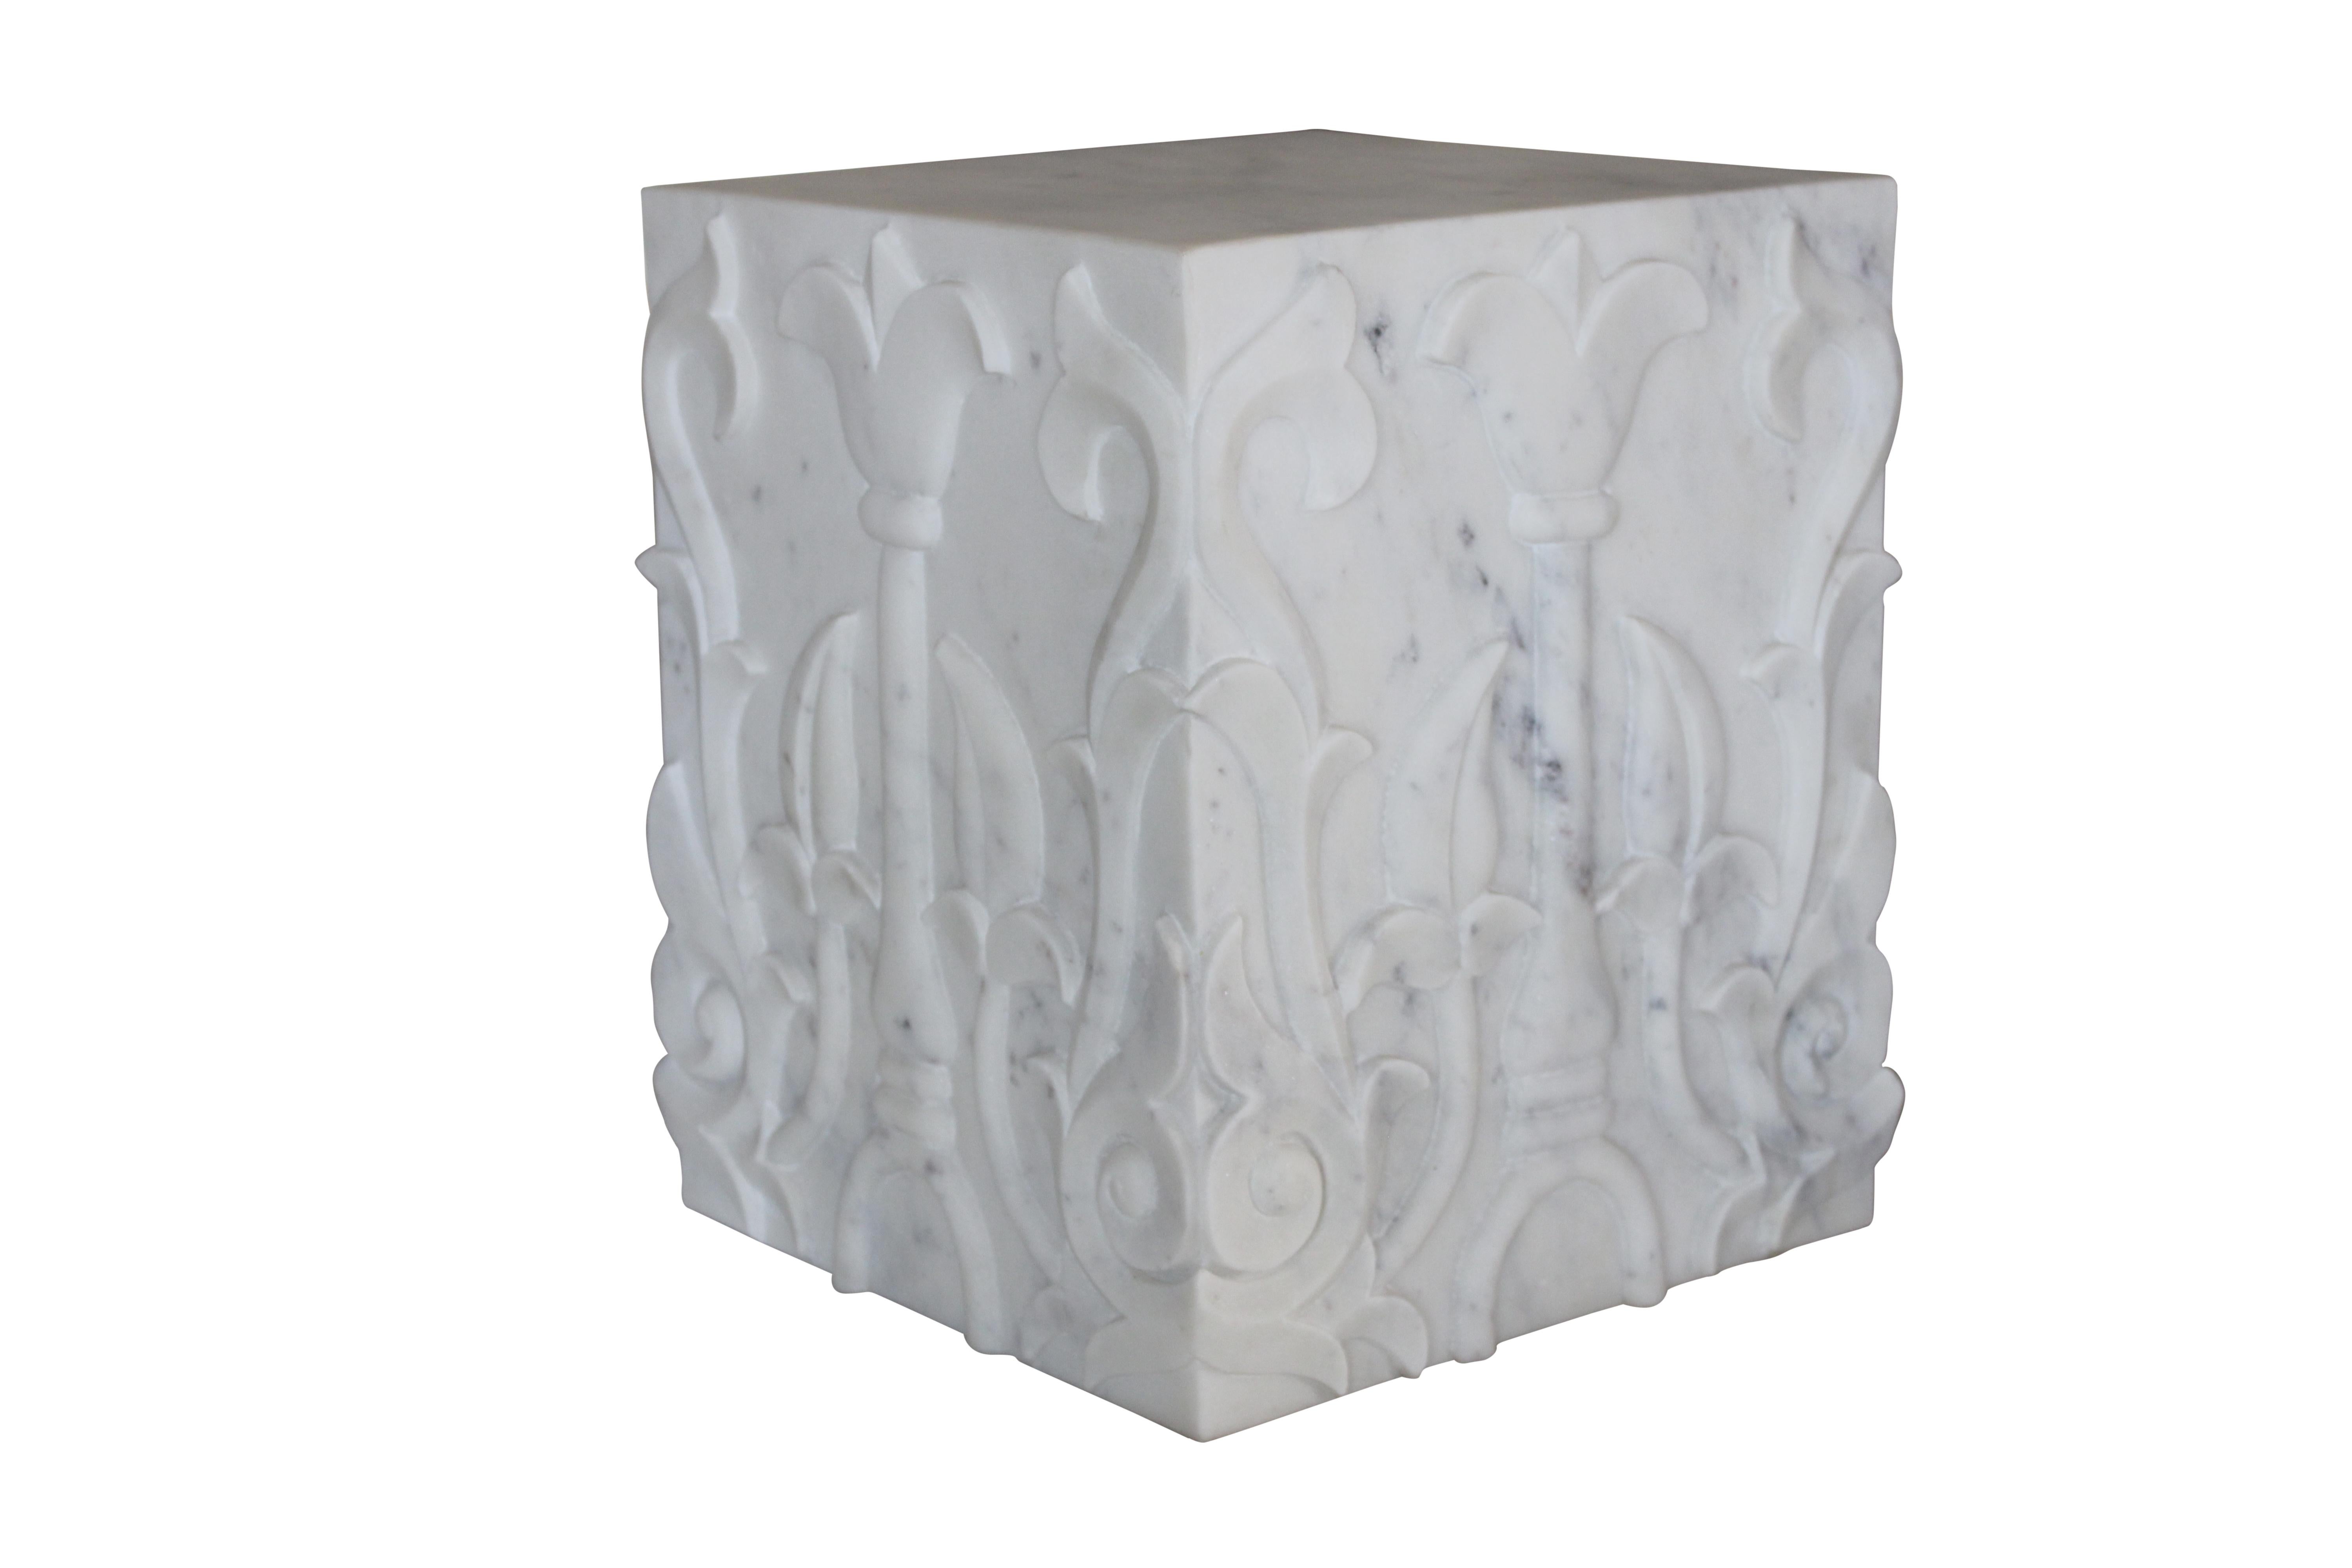 Other Lotus carved Pedestal in White Marble Handcrafted in India by Stephanie Odegard For Sale